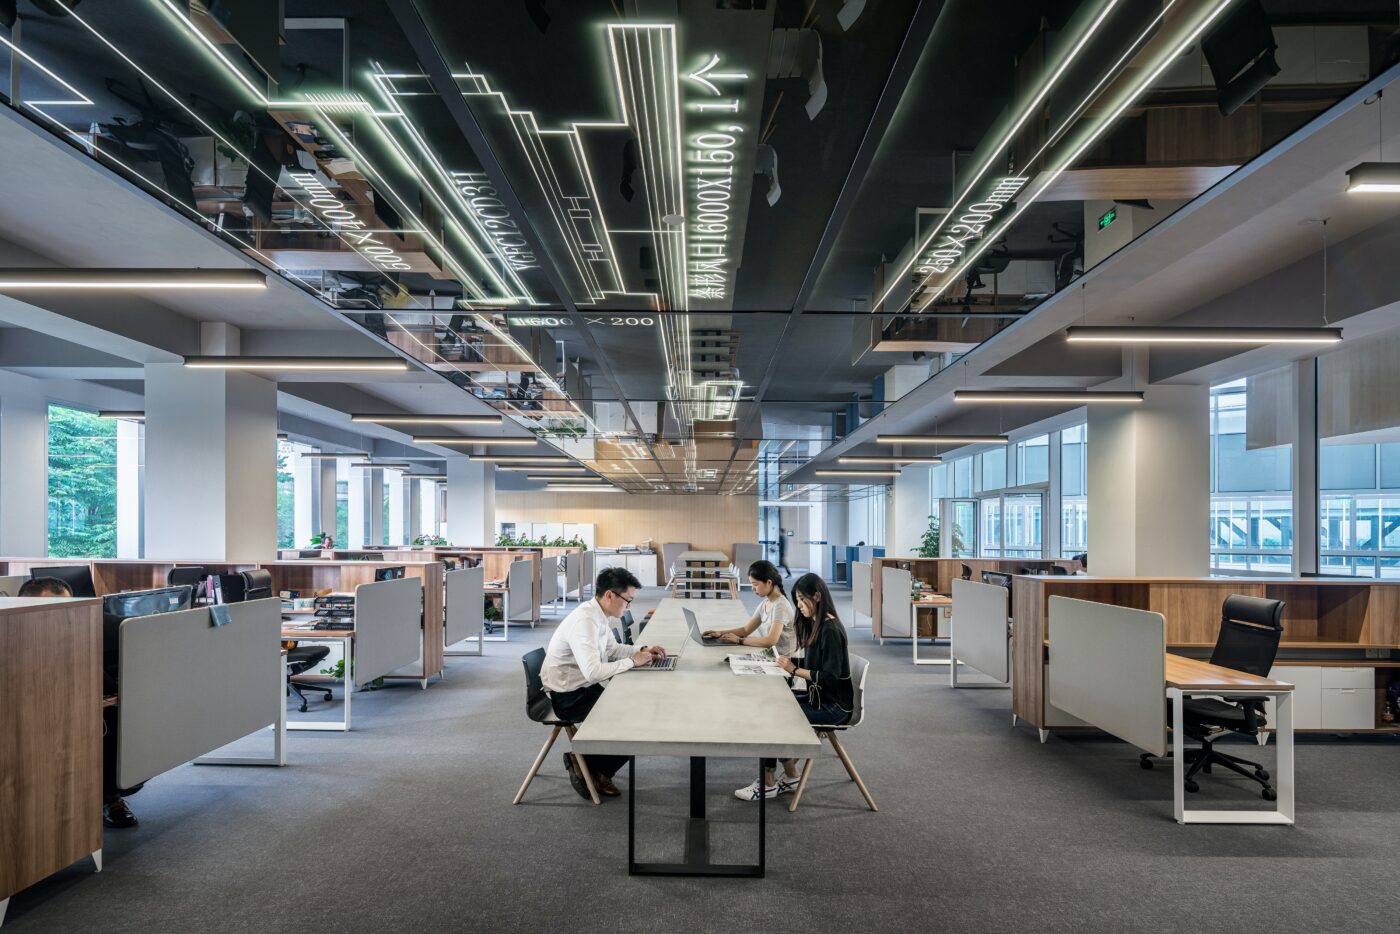 People working around a long table. On the ceiling, the building's energy systems are visible. 